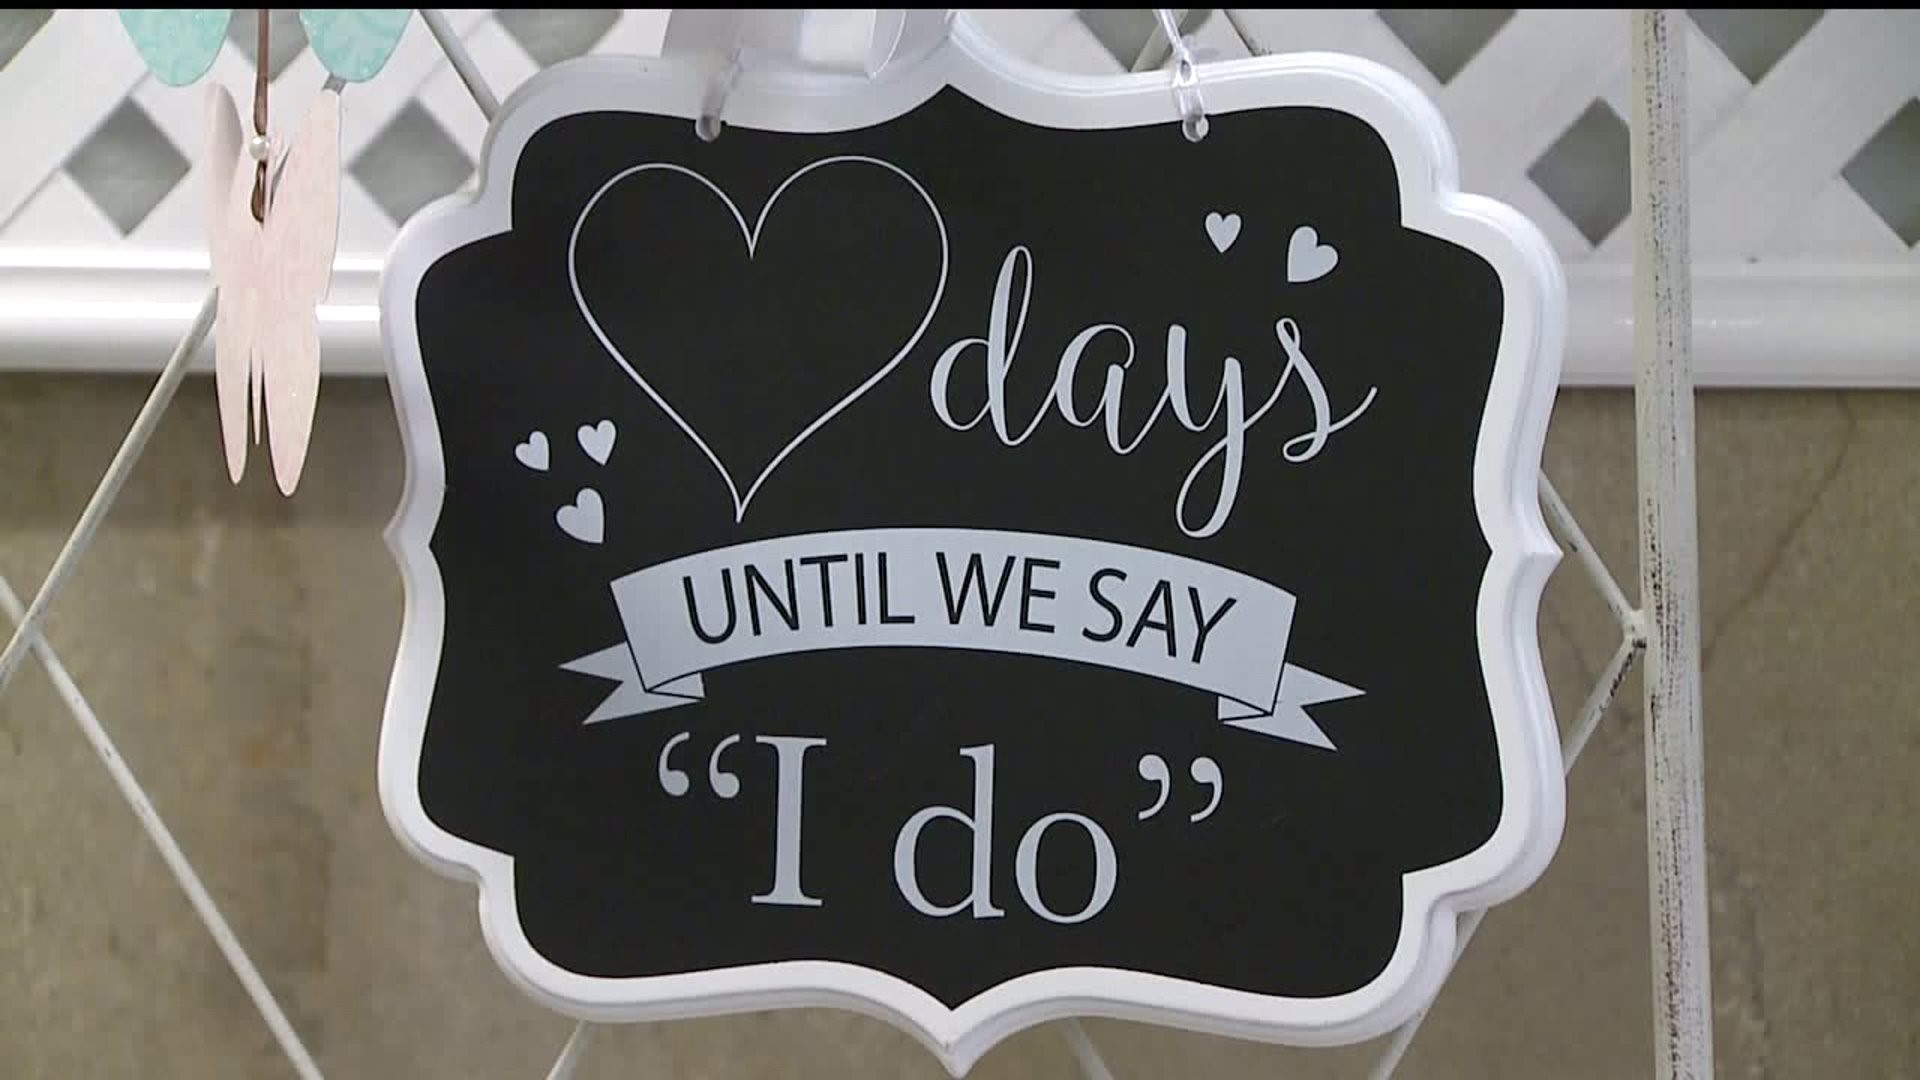 Marriage license selfie station pops up at Rock Island County Clerk`s Office